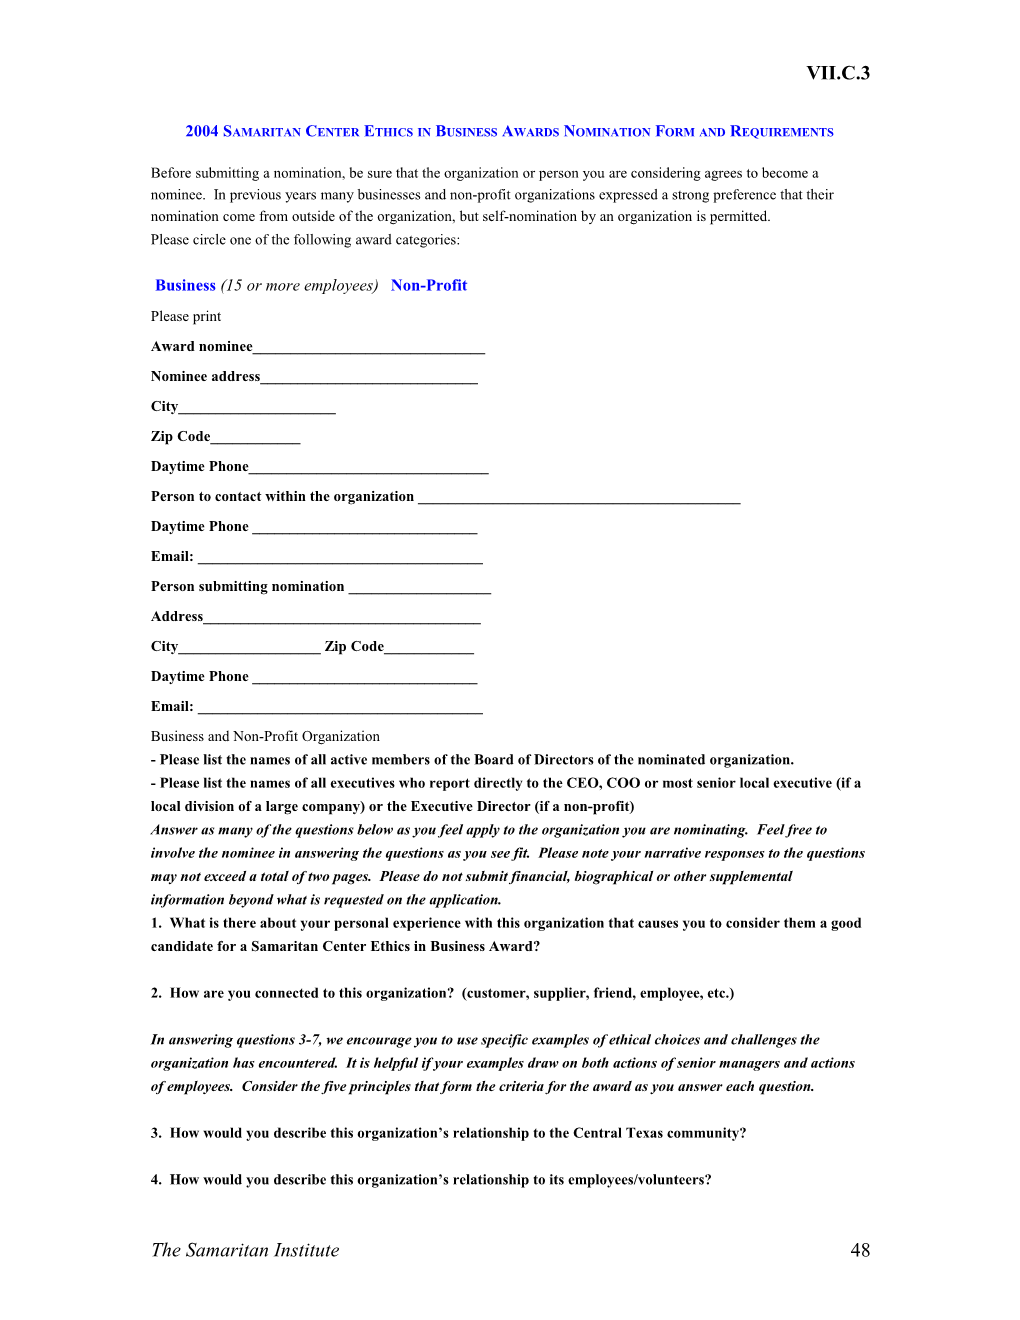 2004 Samaritan Center Ethics in Business Awards Nomination Form and Requirements